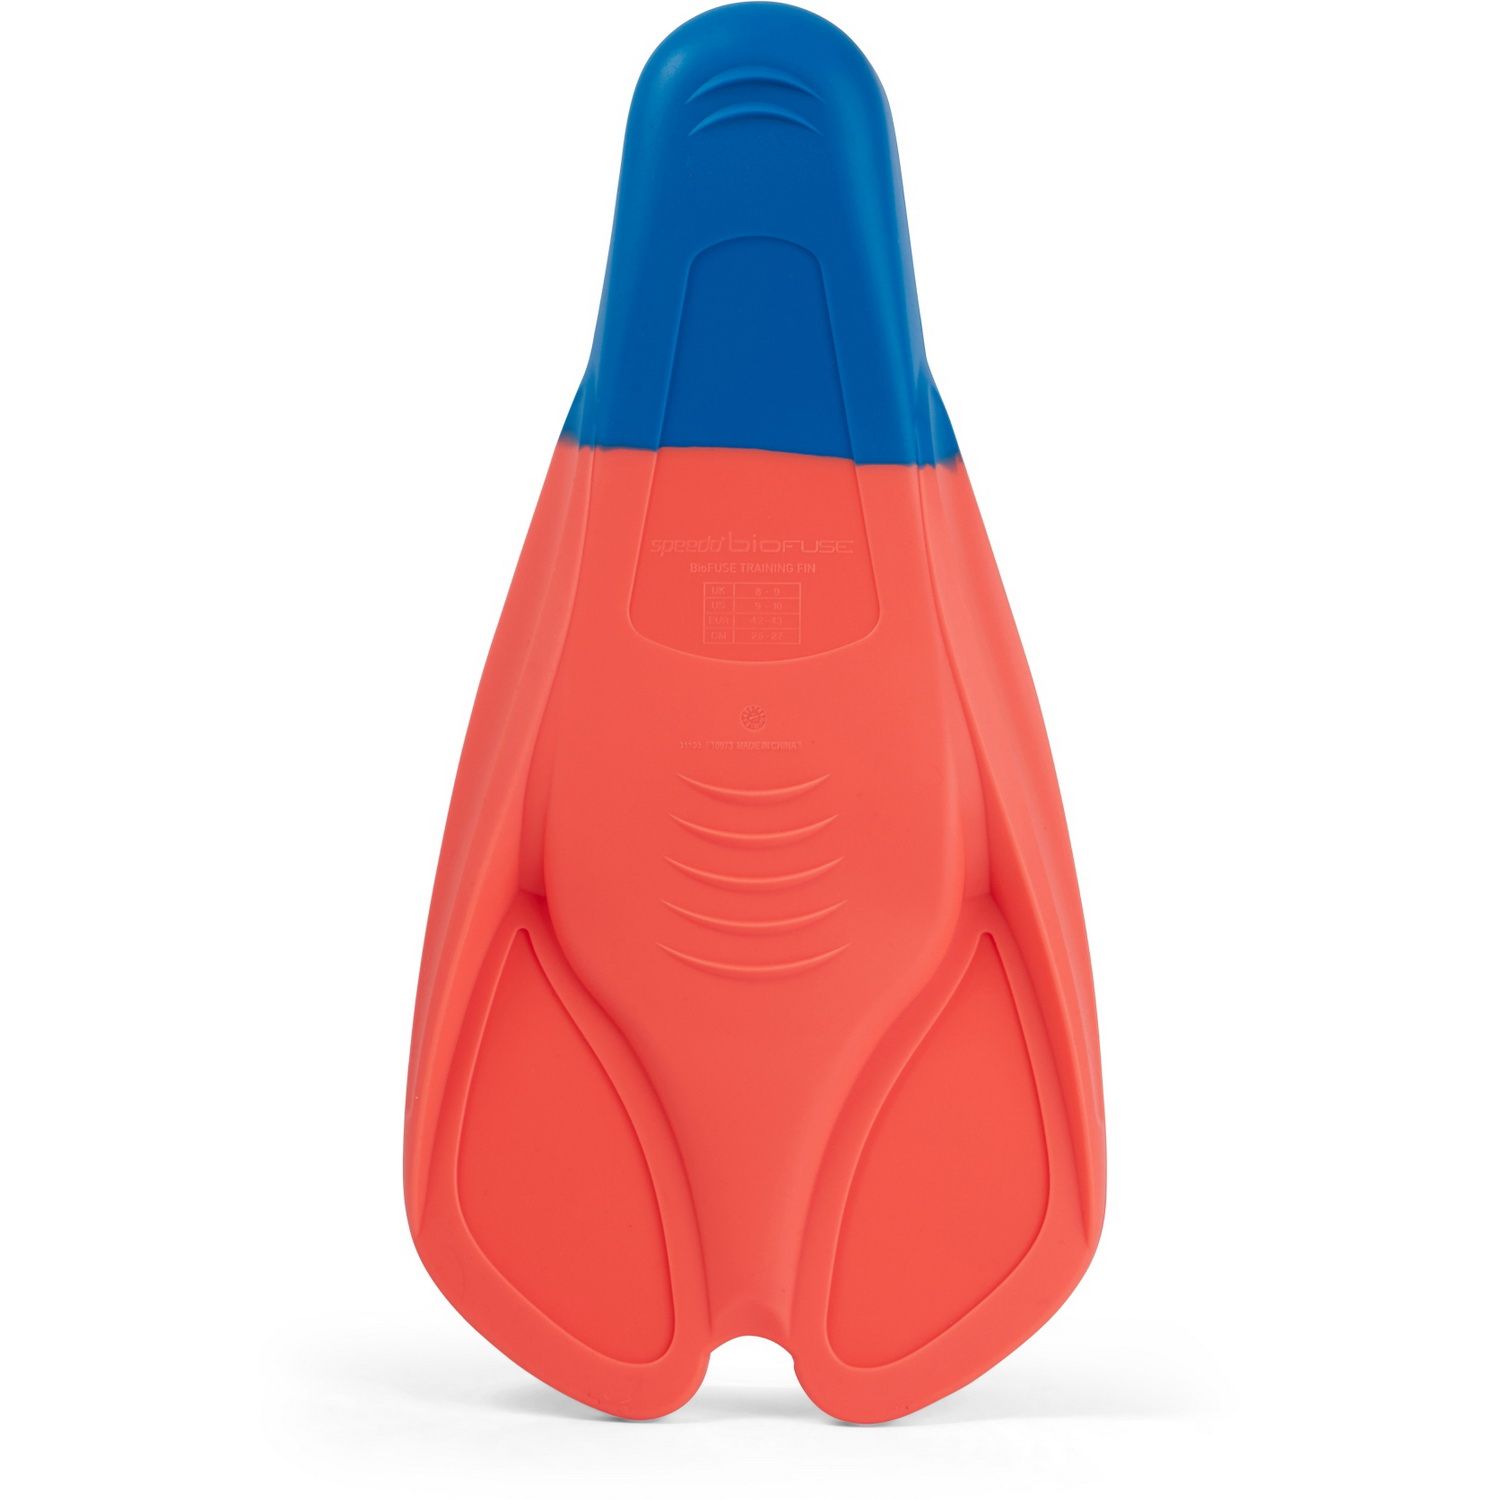 Plavecké plutvy TRAINING FIN - RED/BLUE 